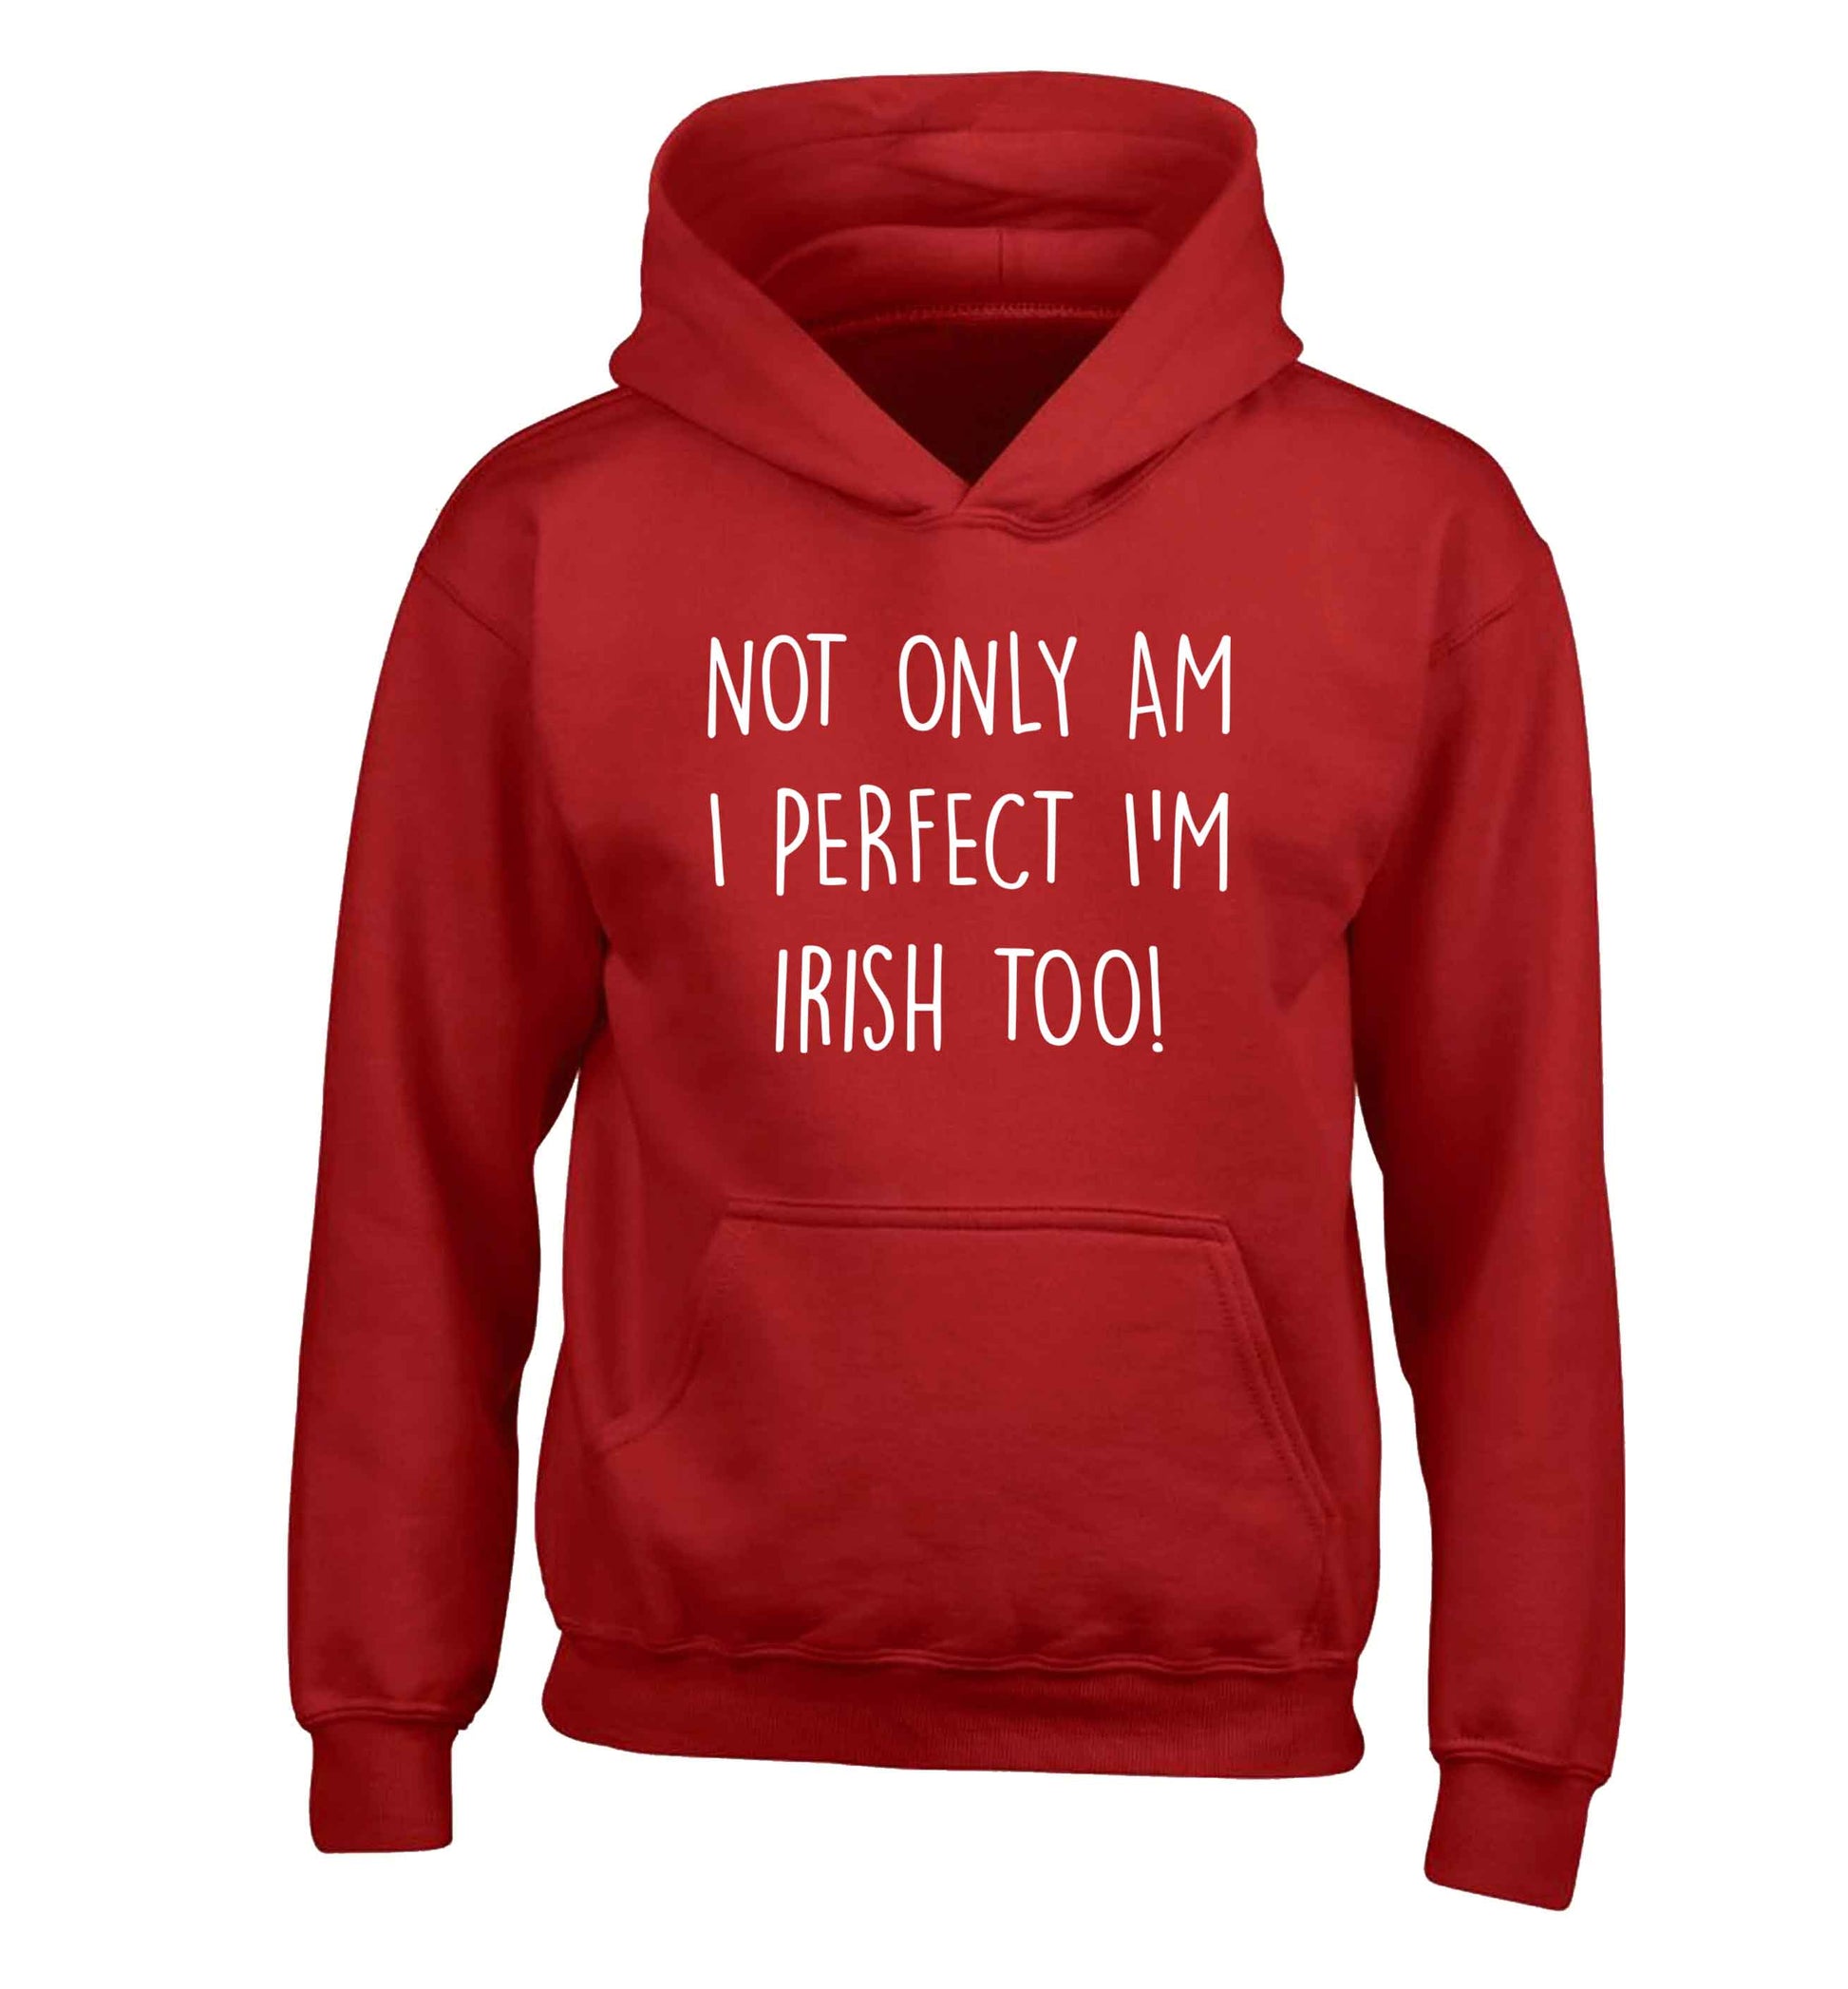 Not only am I perfect I'm Irish too! children's red hoodie 12-13 Years